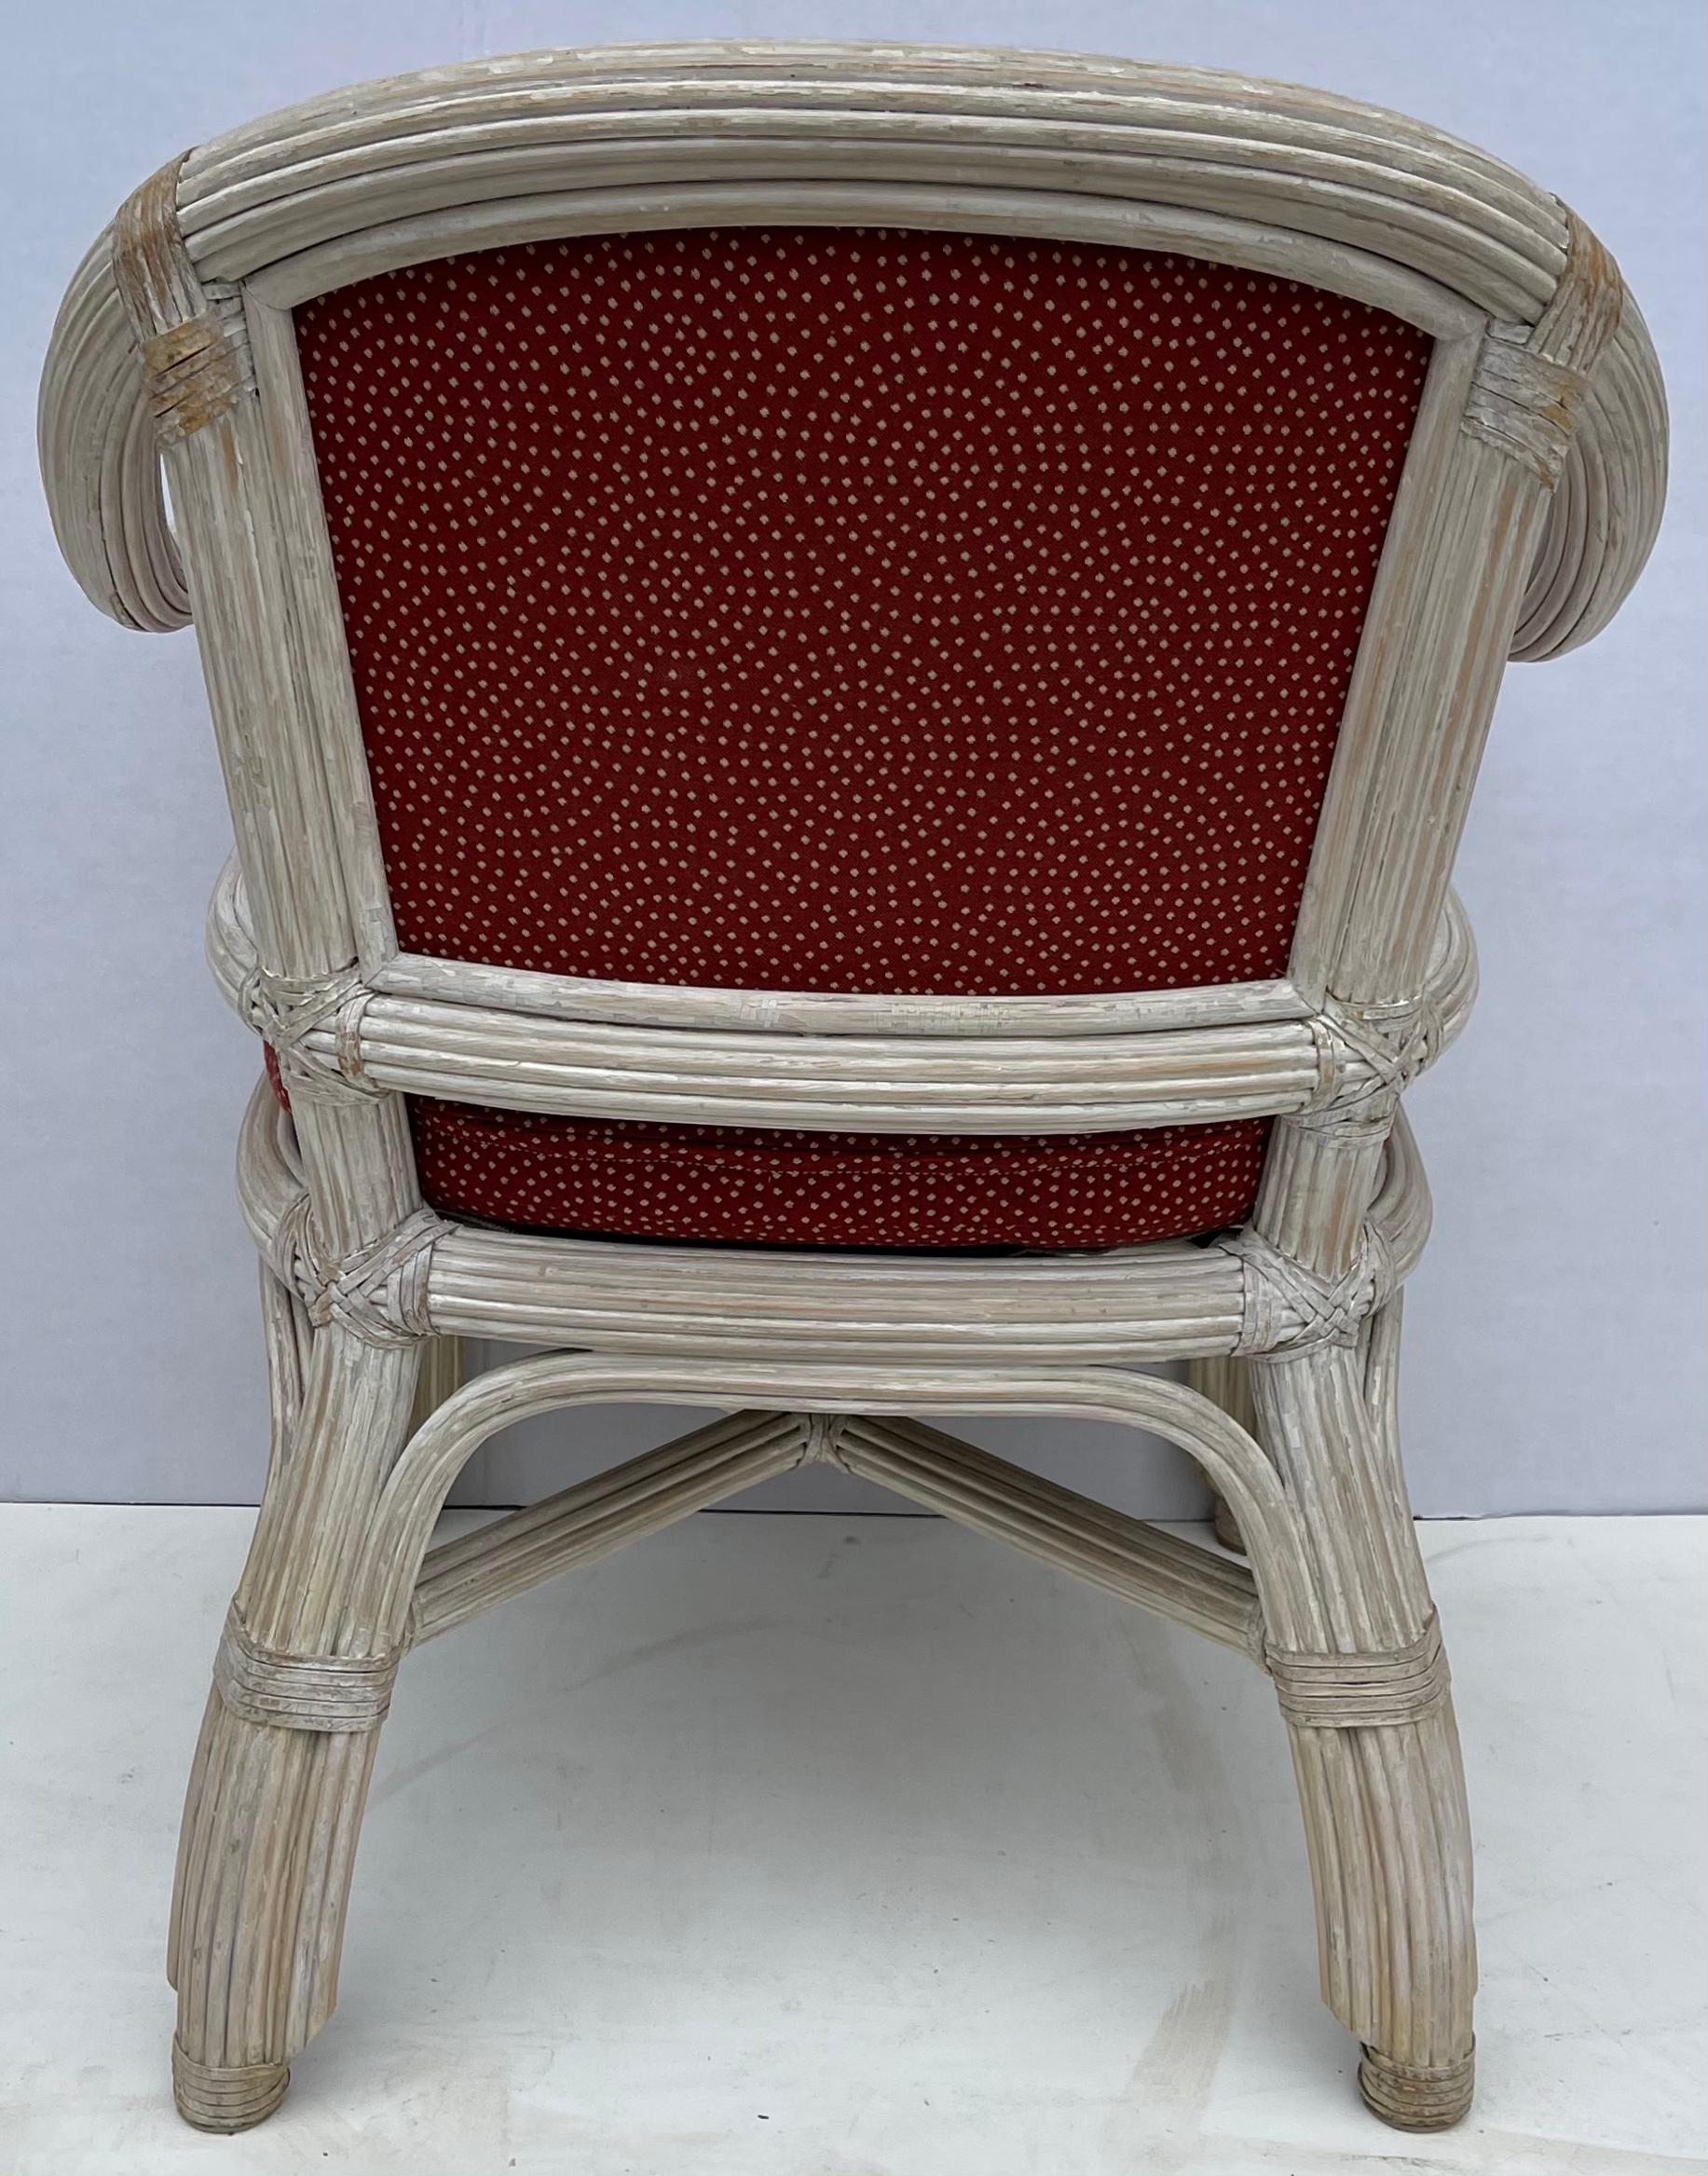 Upholstery 1970s Cerused Reeded Pencil Bamboo Chairs By Henry Link - S/4 For Sale